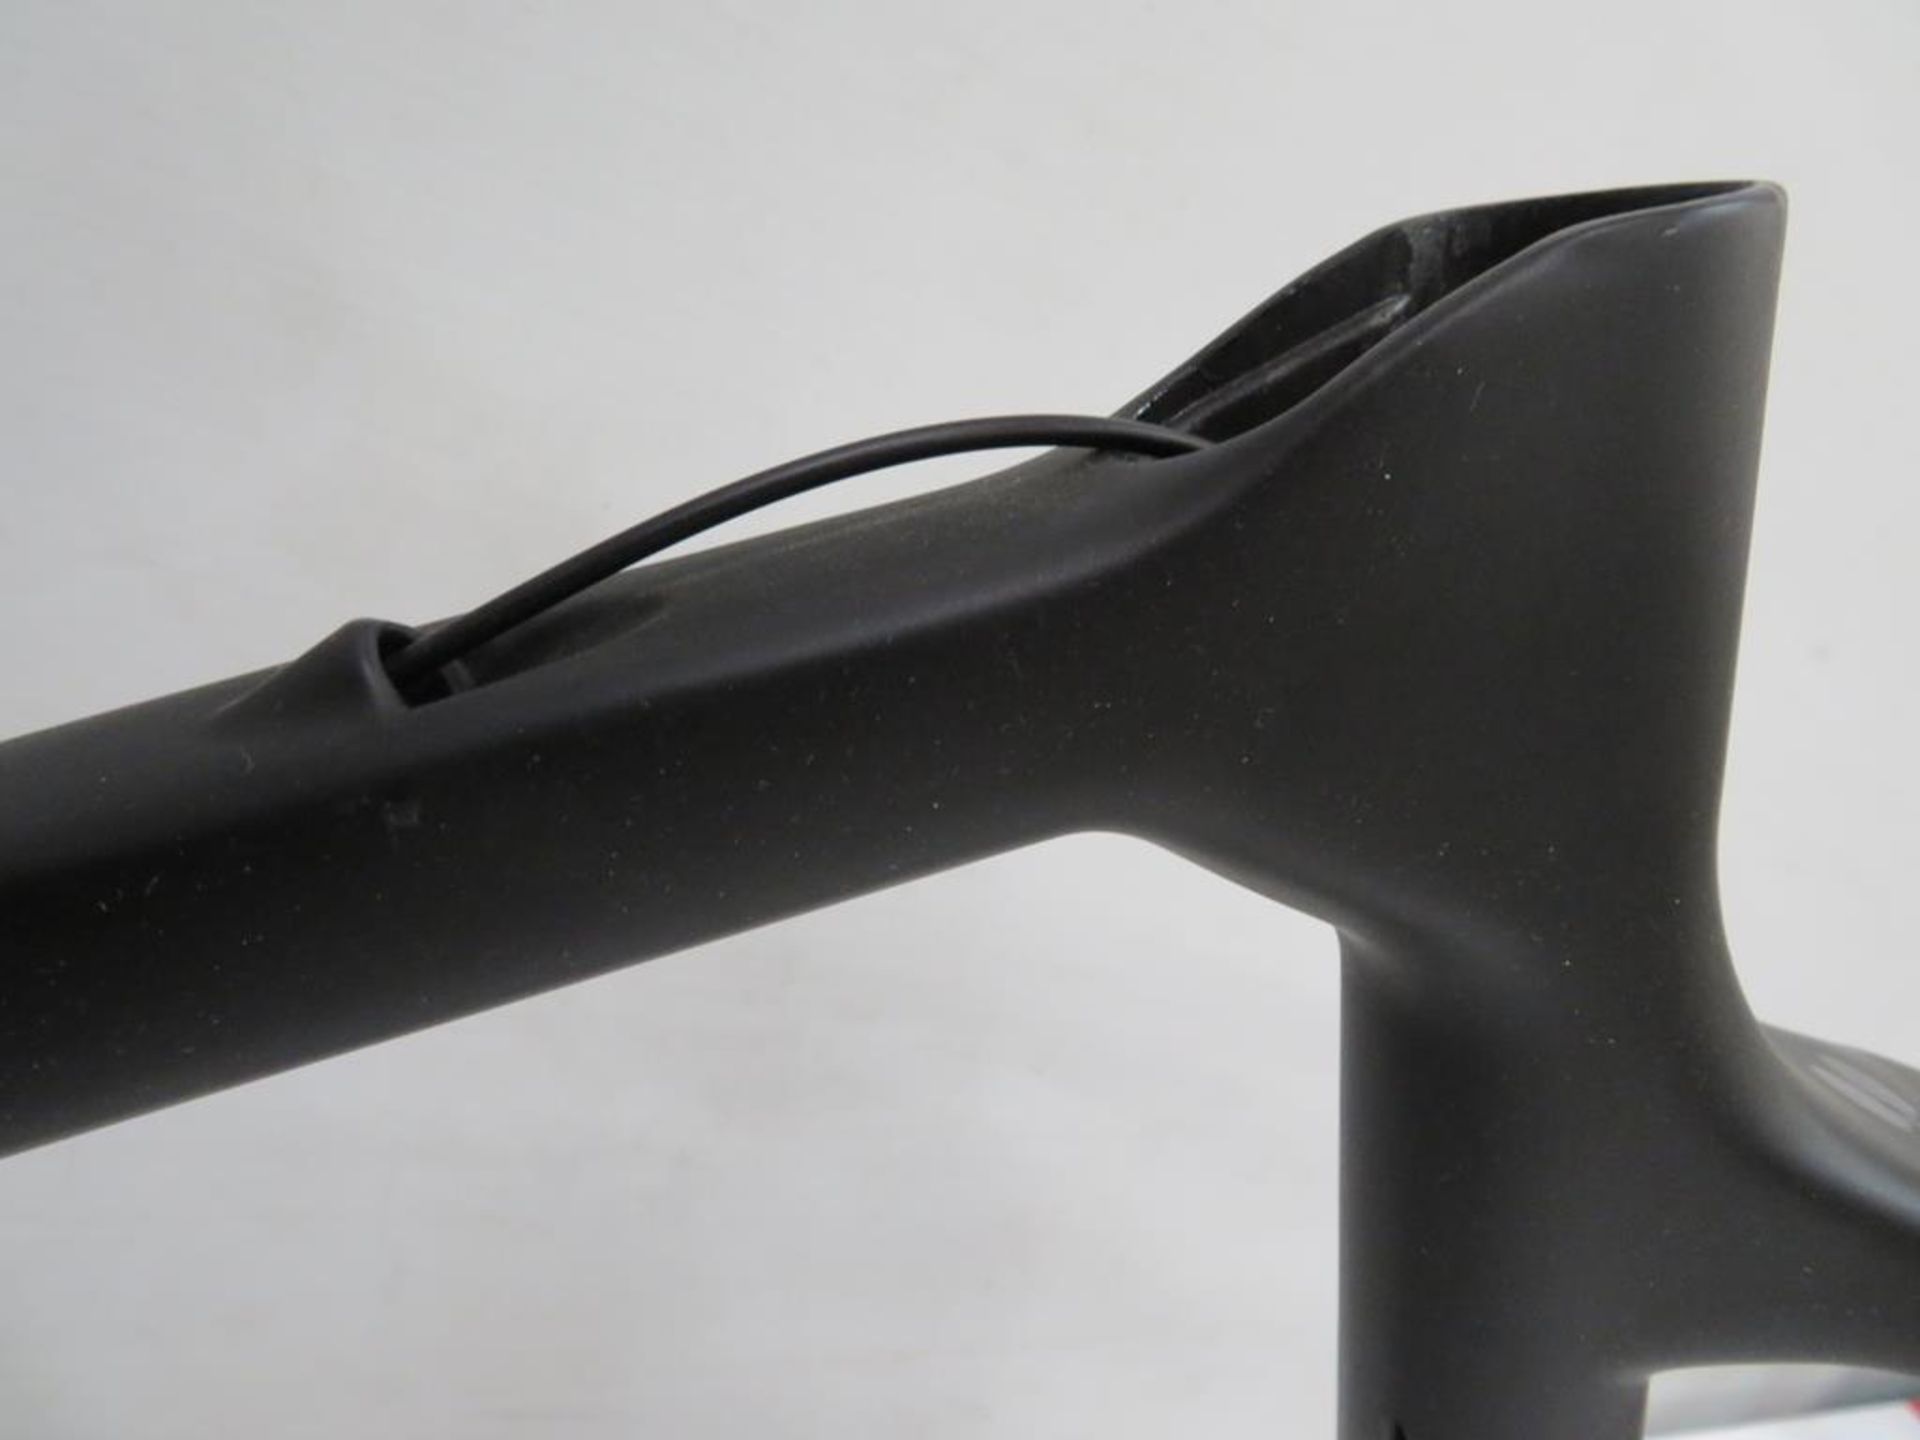 Colnago C-RS Carbon Bike Frame with a boxed Colnago Forcella Carbonio Fork - Image 4 of 12